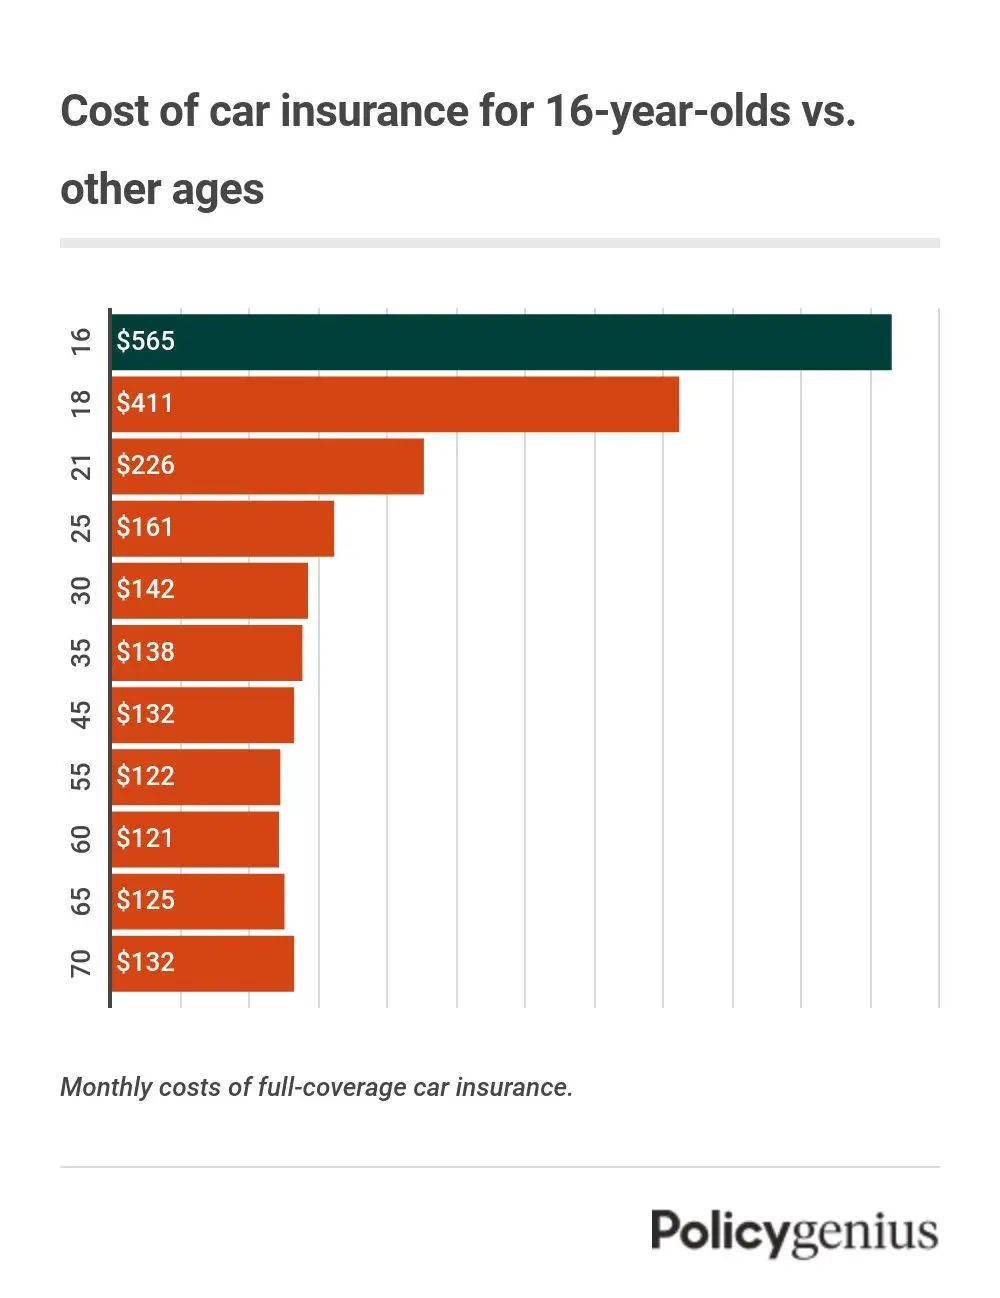 A graph showing the cost of car insurance for 16-year-olds.